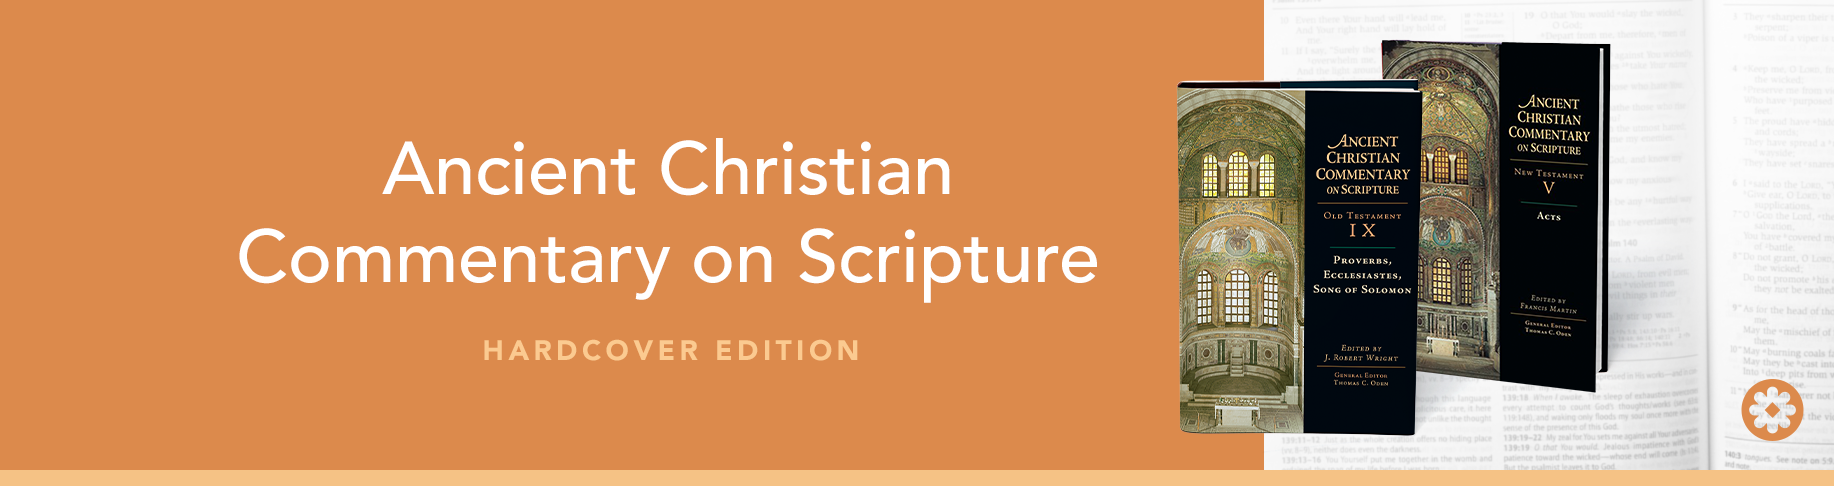 Ancient Christian Commentary on Scripture